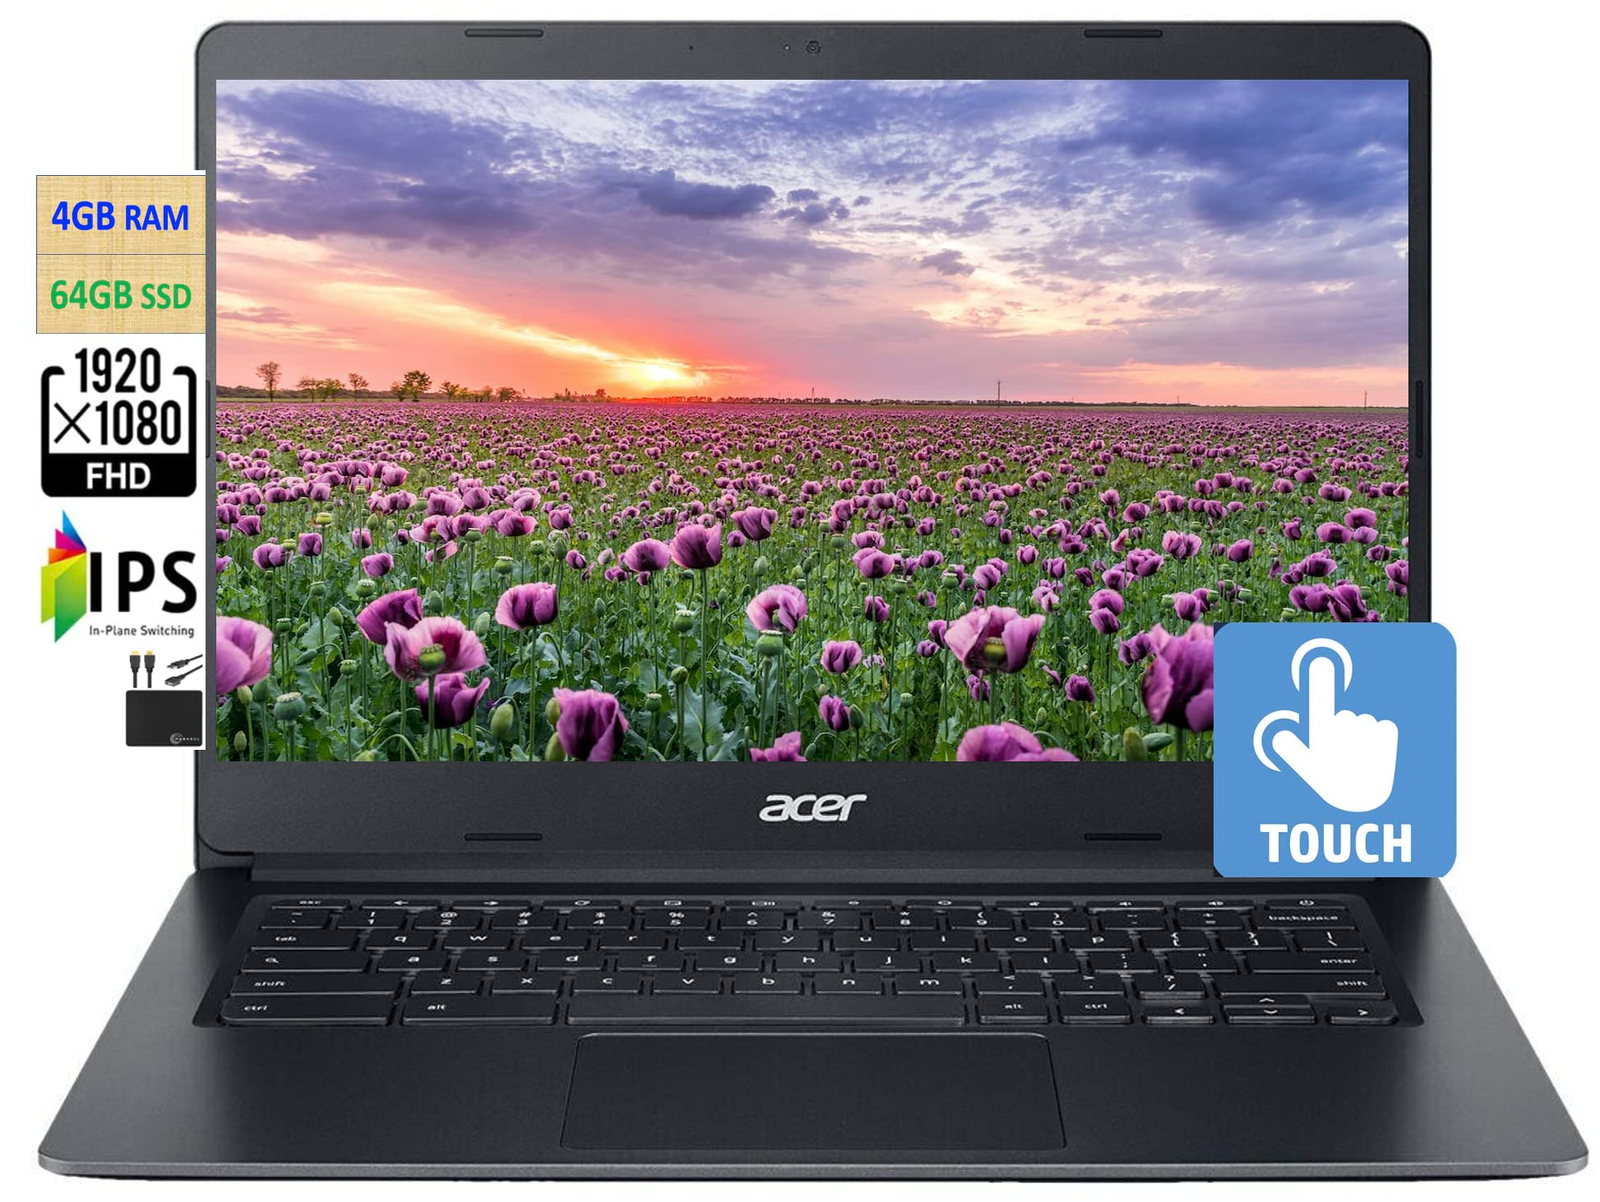 acer 2023 15 HD Premium Chromebook, Intel Celeron N Processor 2.78GHz Turbo Speed, 4GB Ram, 64GB SSD, Ultra-Fast WiFi Up to 1700 Mbps, Full Size Keyboard, Chrome OS, Arctic Silver Color-(Renewed)